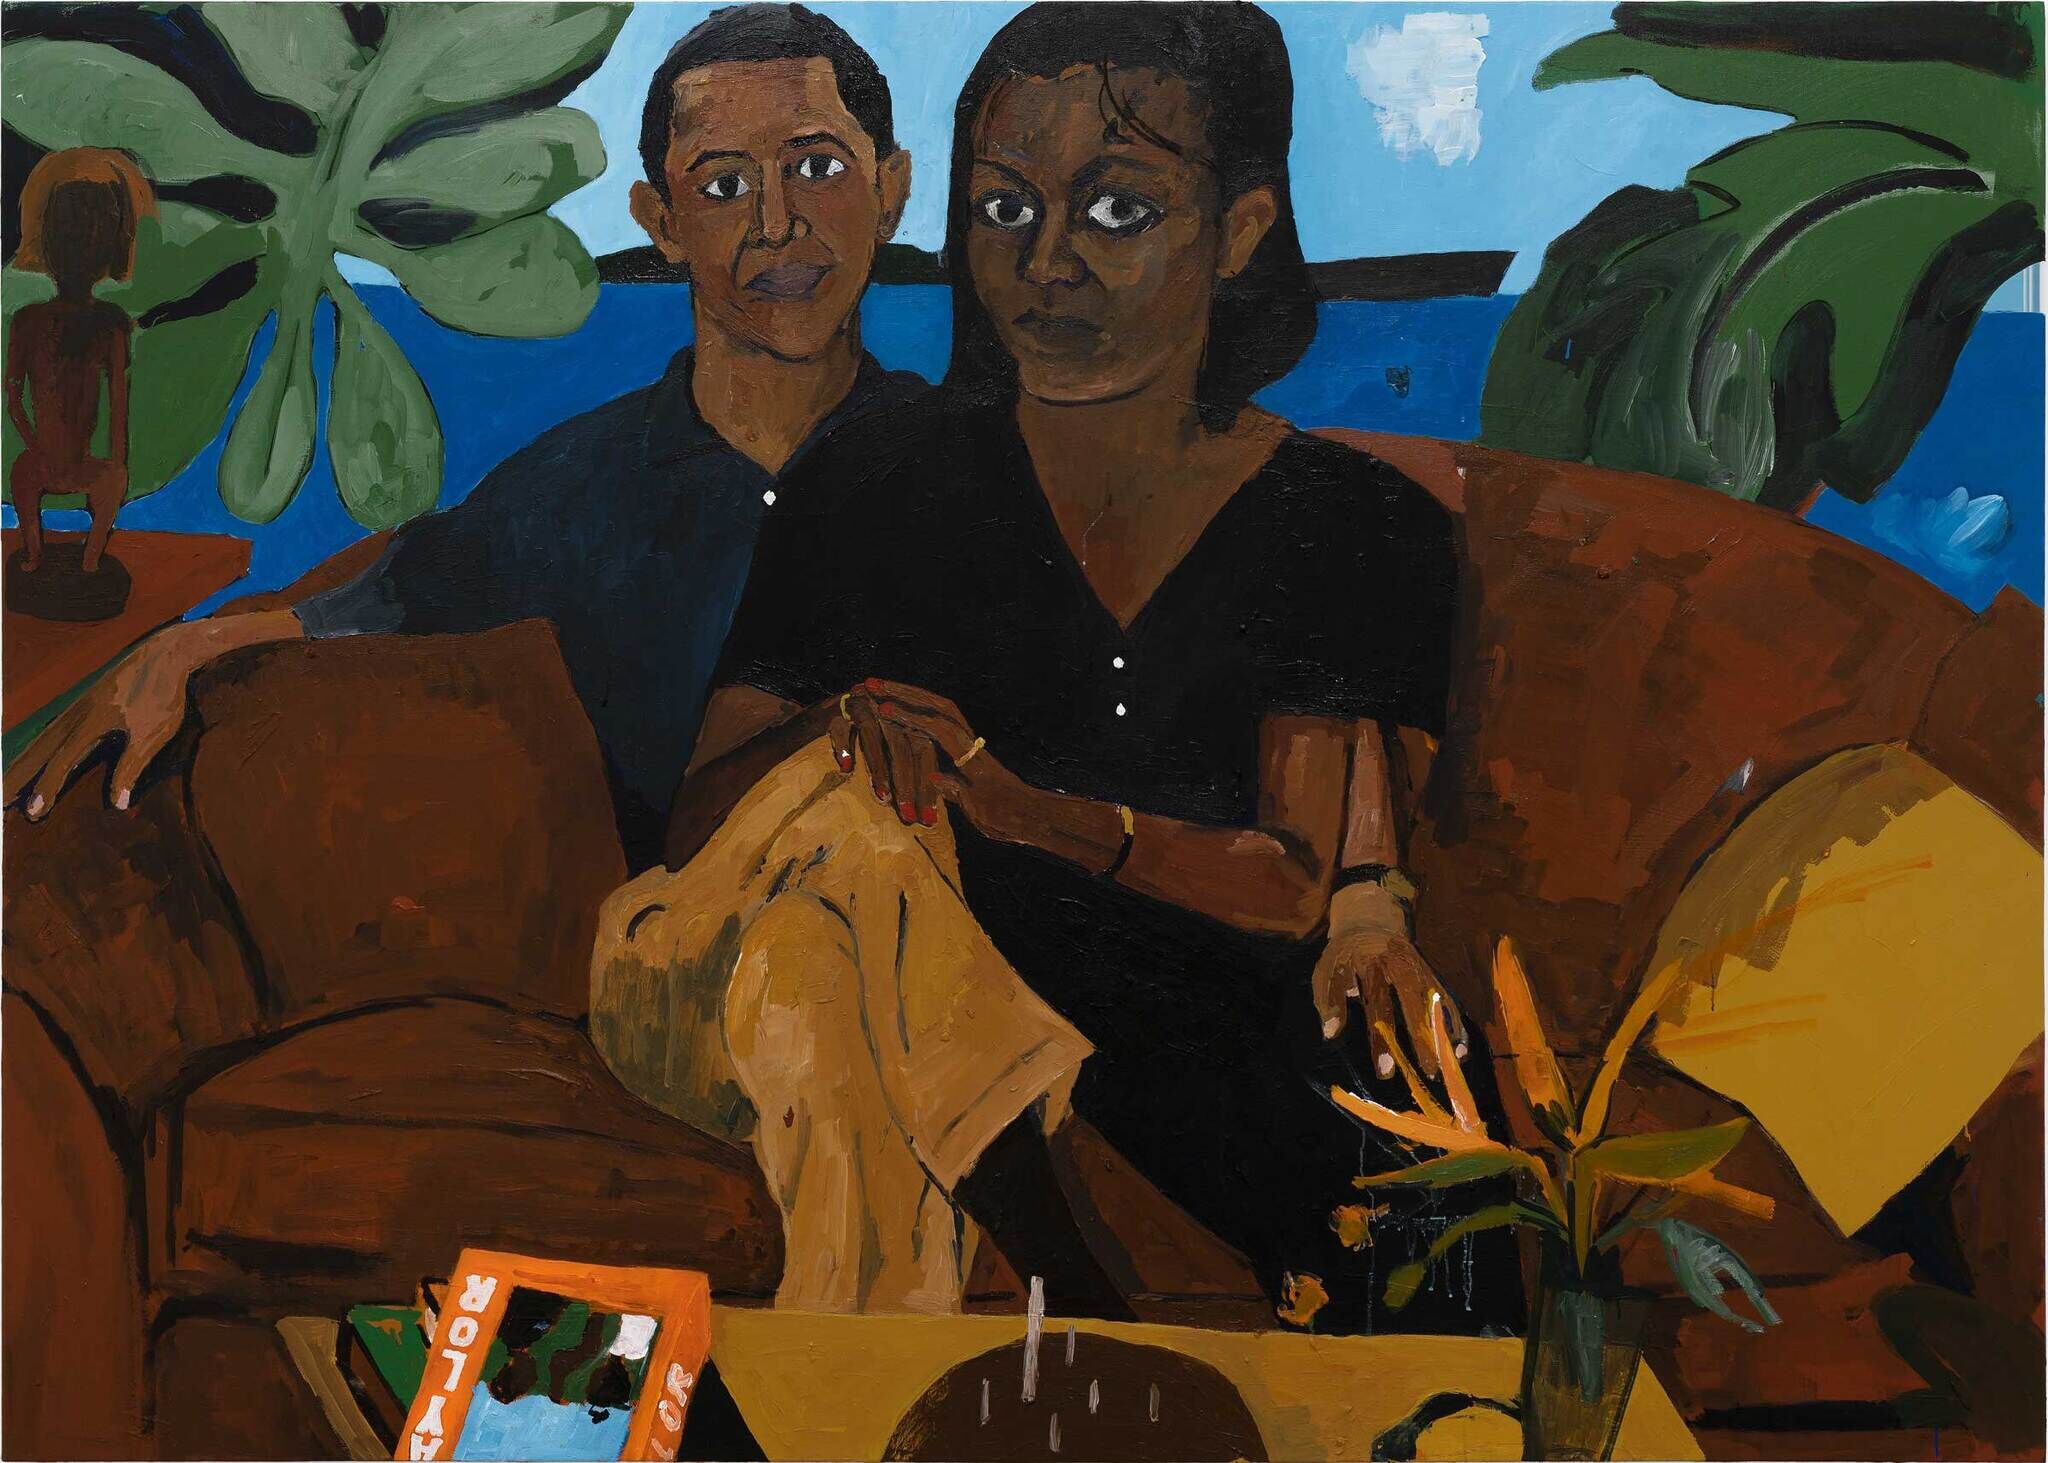 A close up portrait of a couple, man and woman, sitting on a brown sofa against a blue background and green plant leaves.